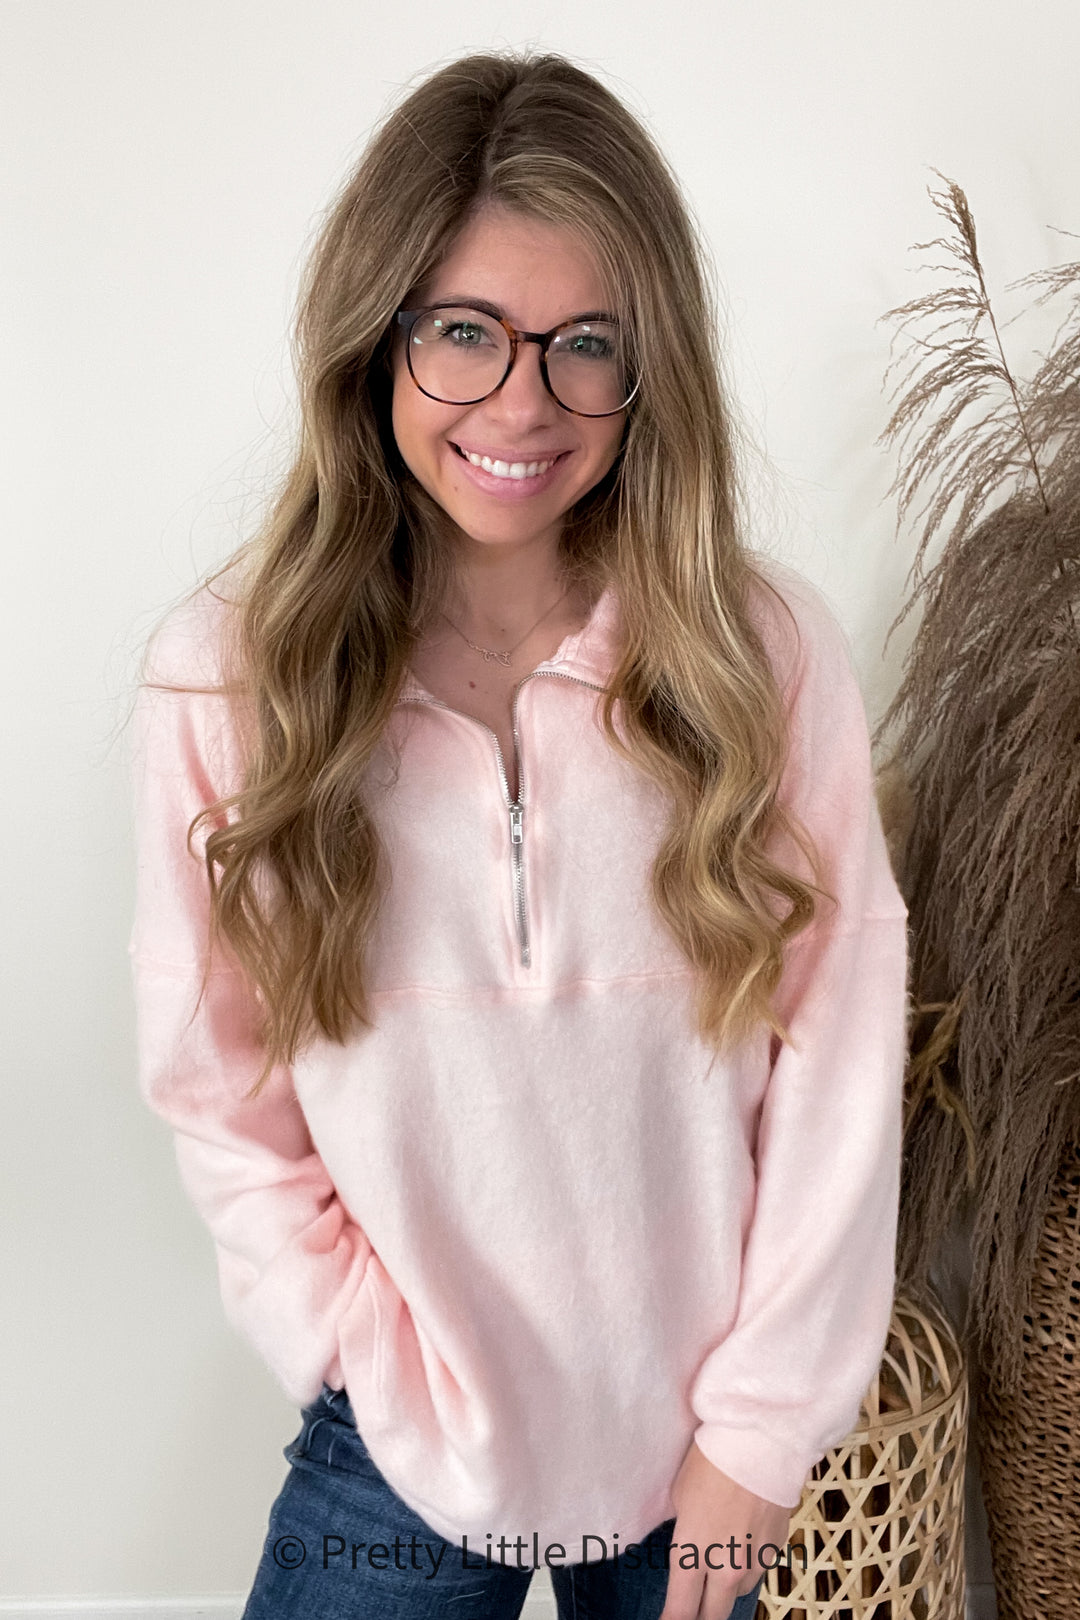 Cozy Moment 1/2 Zip Pullover in Blush